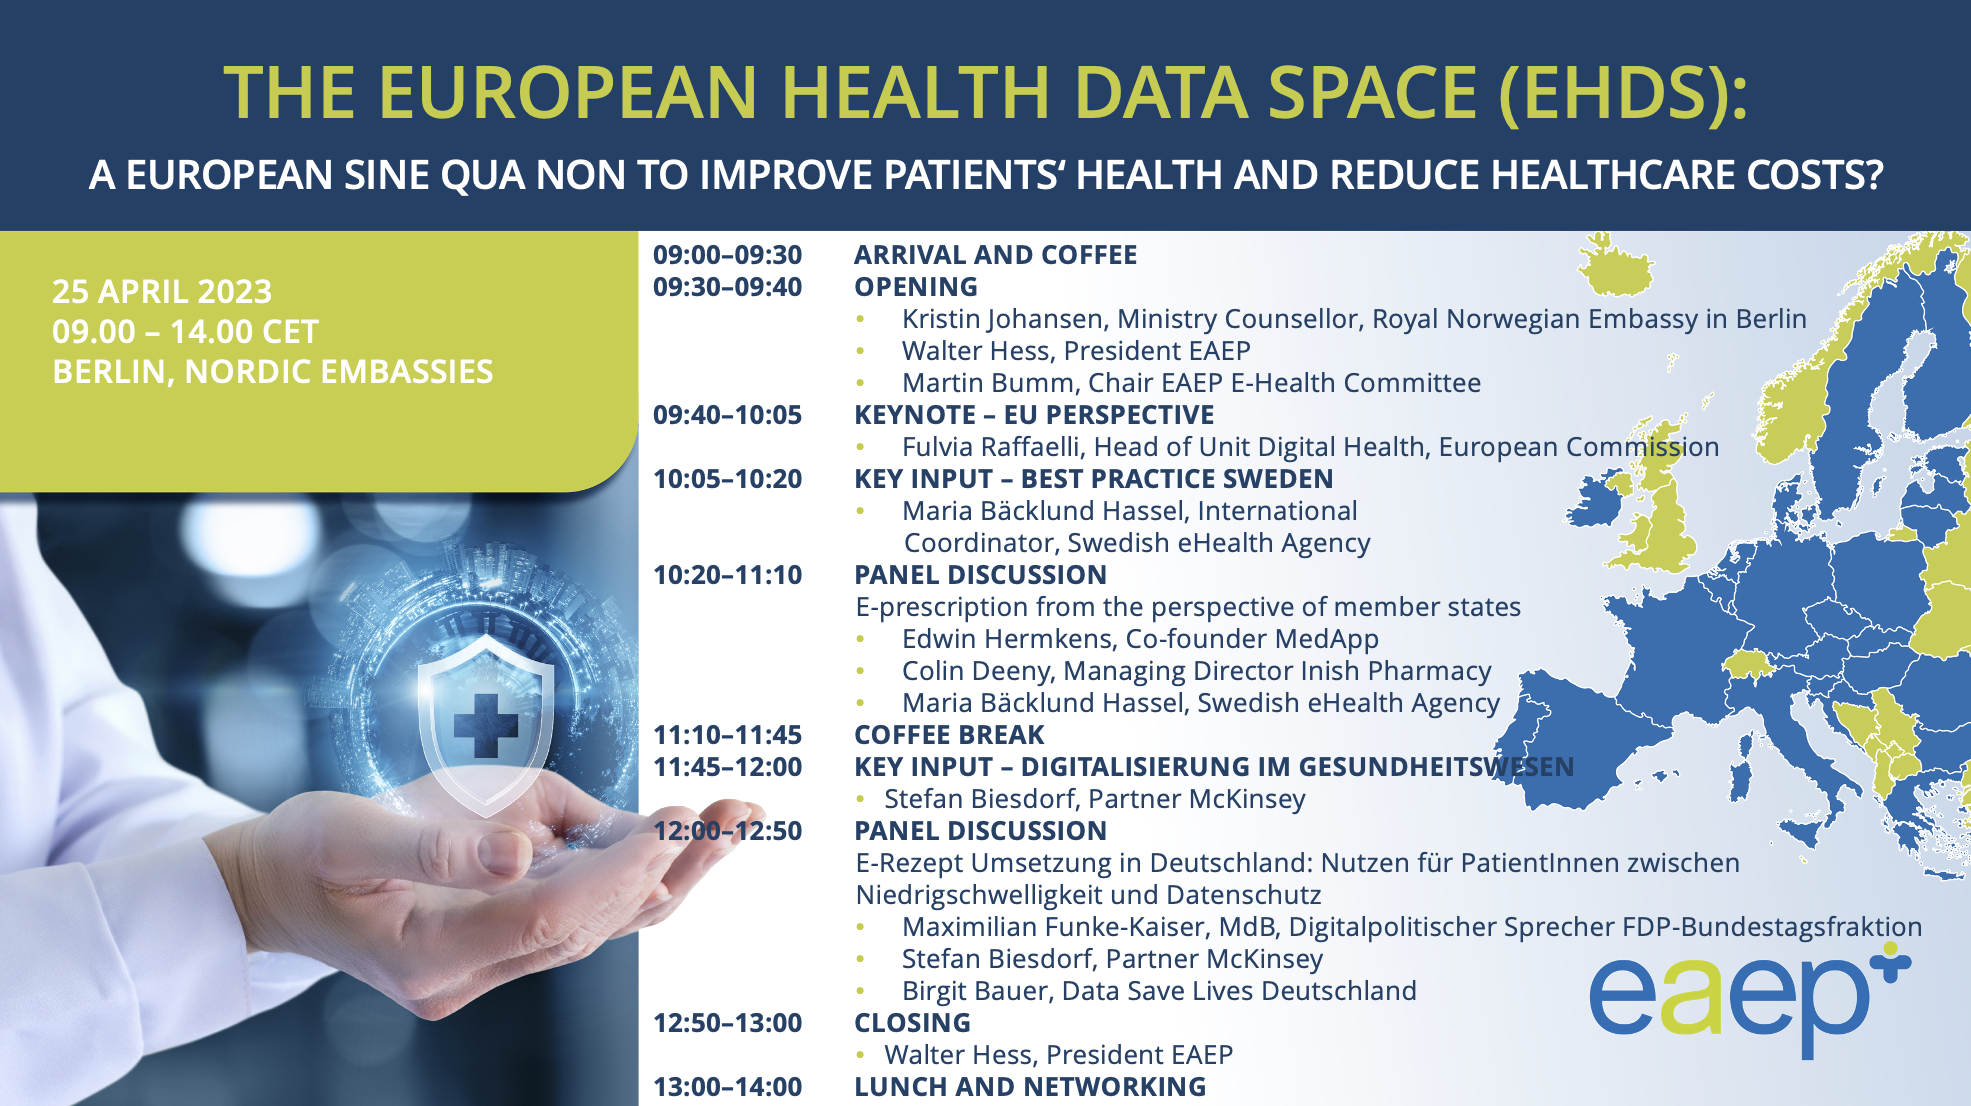 EAEP-Event “The European Health Data Space (EHDS): a European sine qua non to improve patients’ health and reduce healthcare costs?”